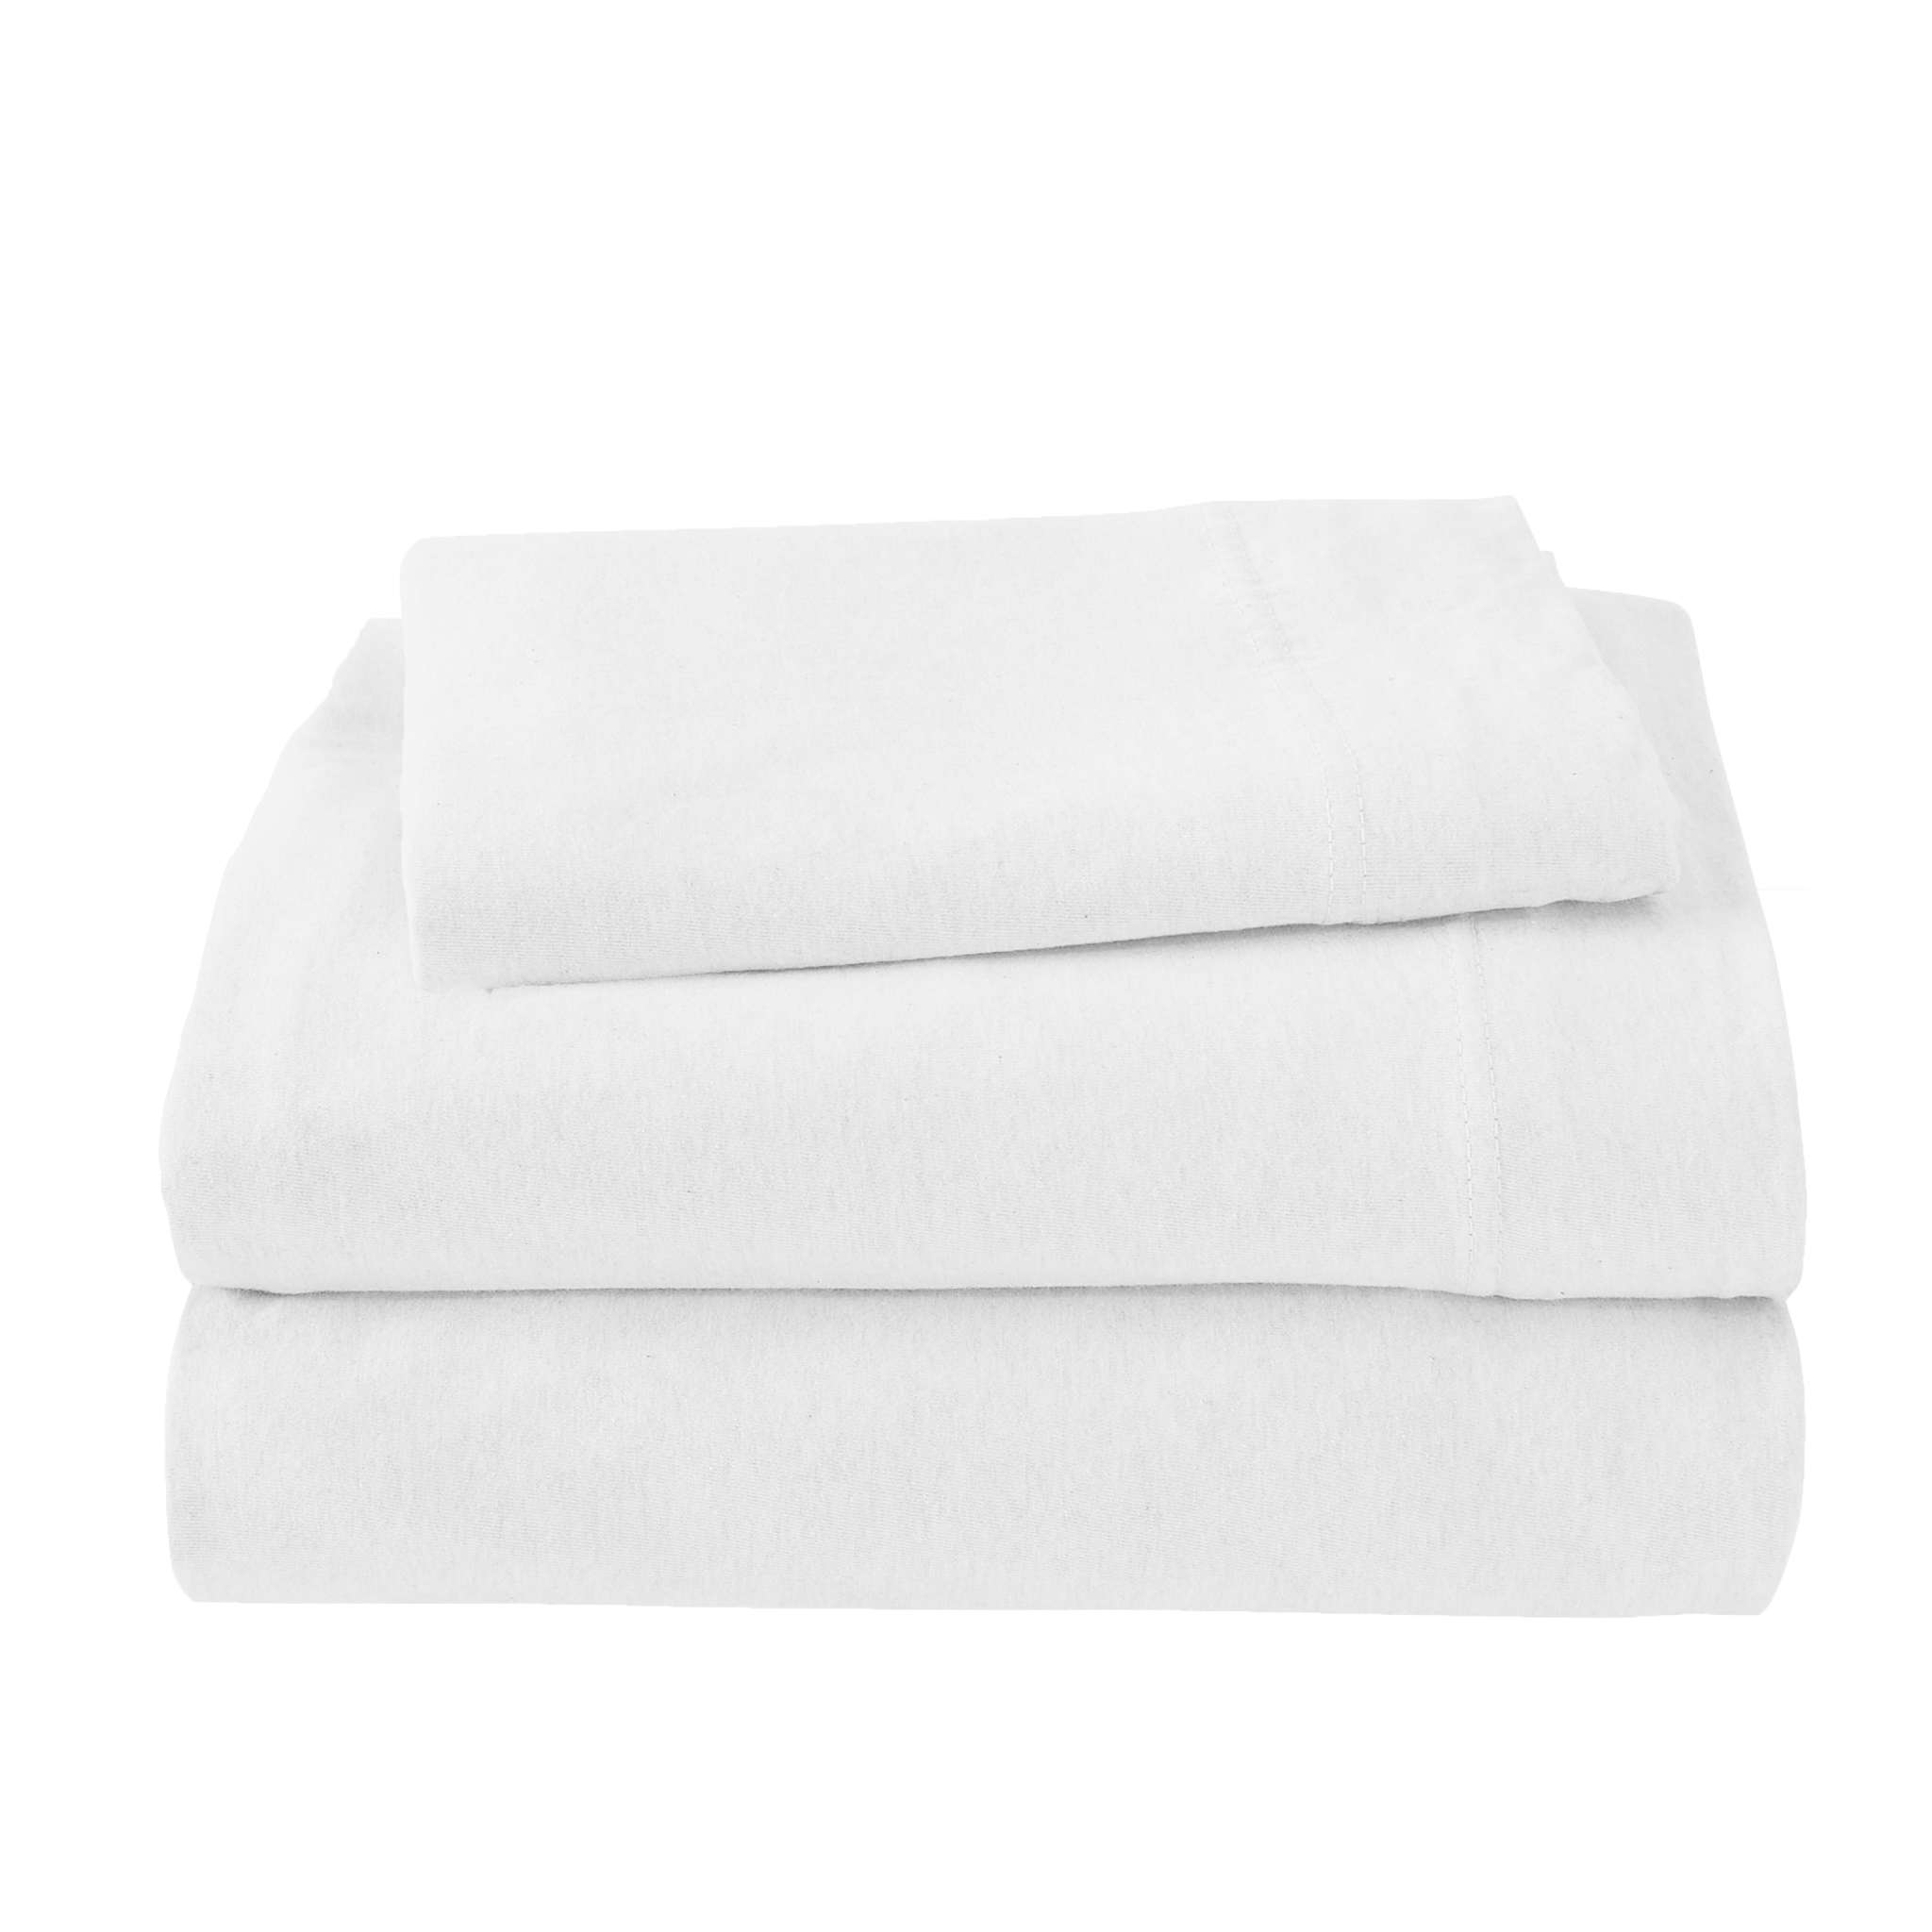 Soft Tees Luxury Cotton Modal Ultra Soft Jersey Knit Sheet Set by Royale Linens - image 4 of 10